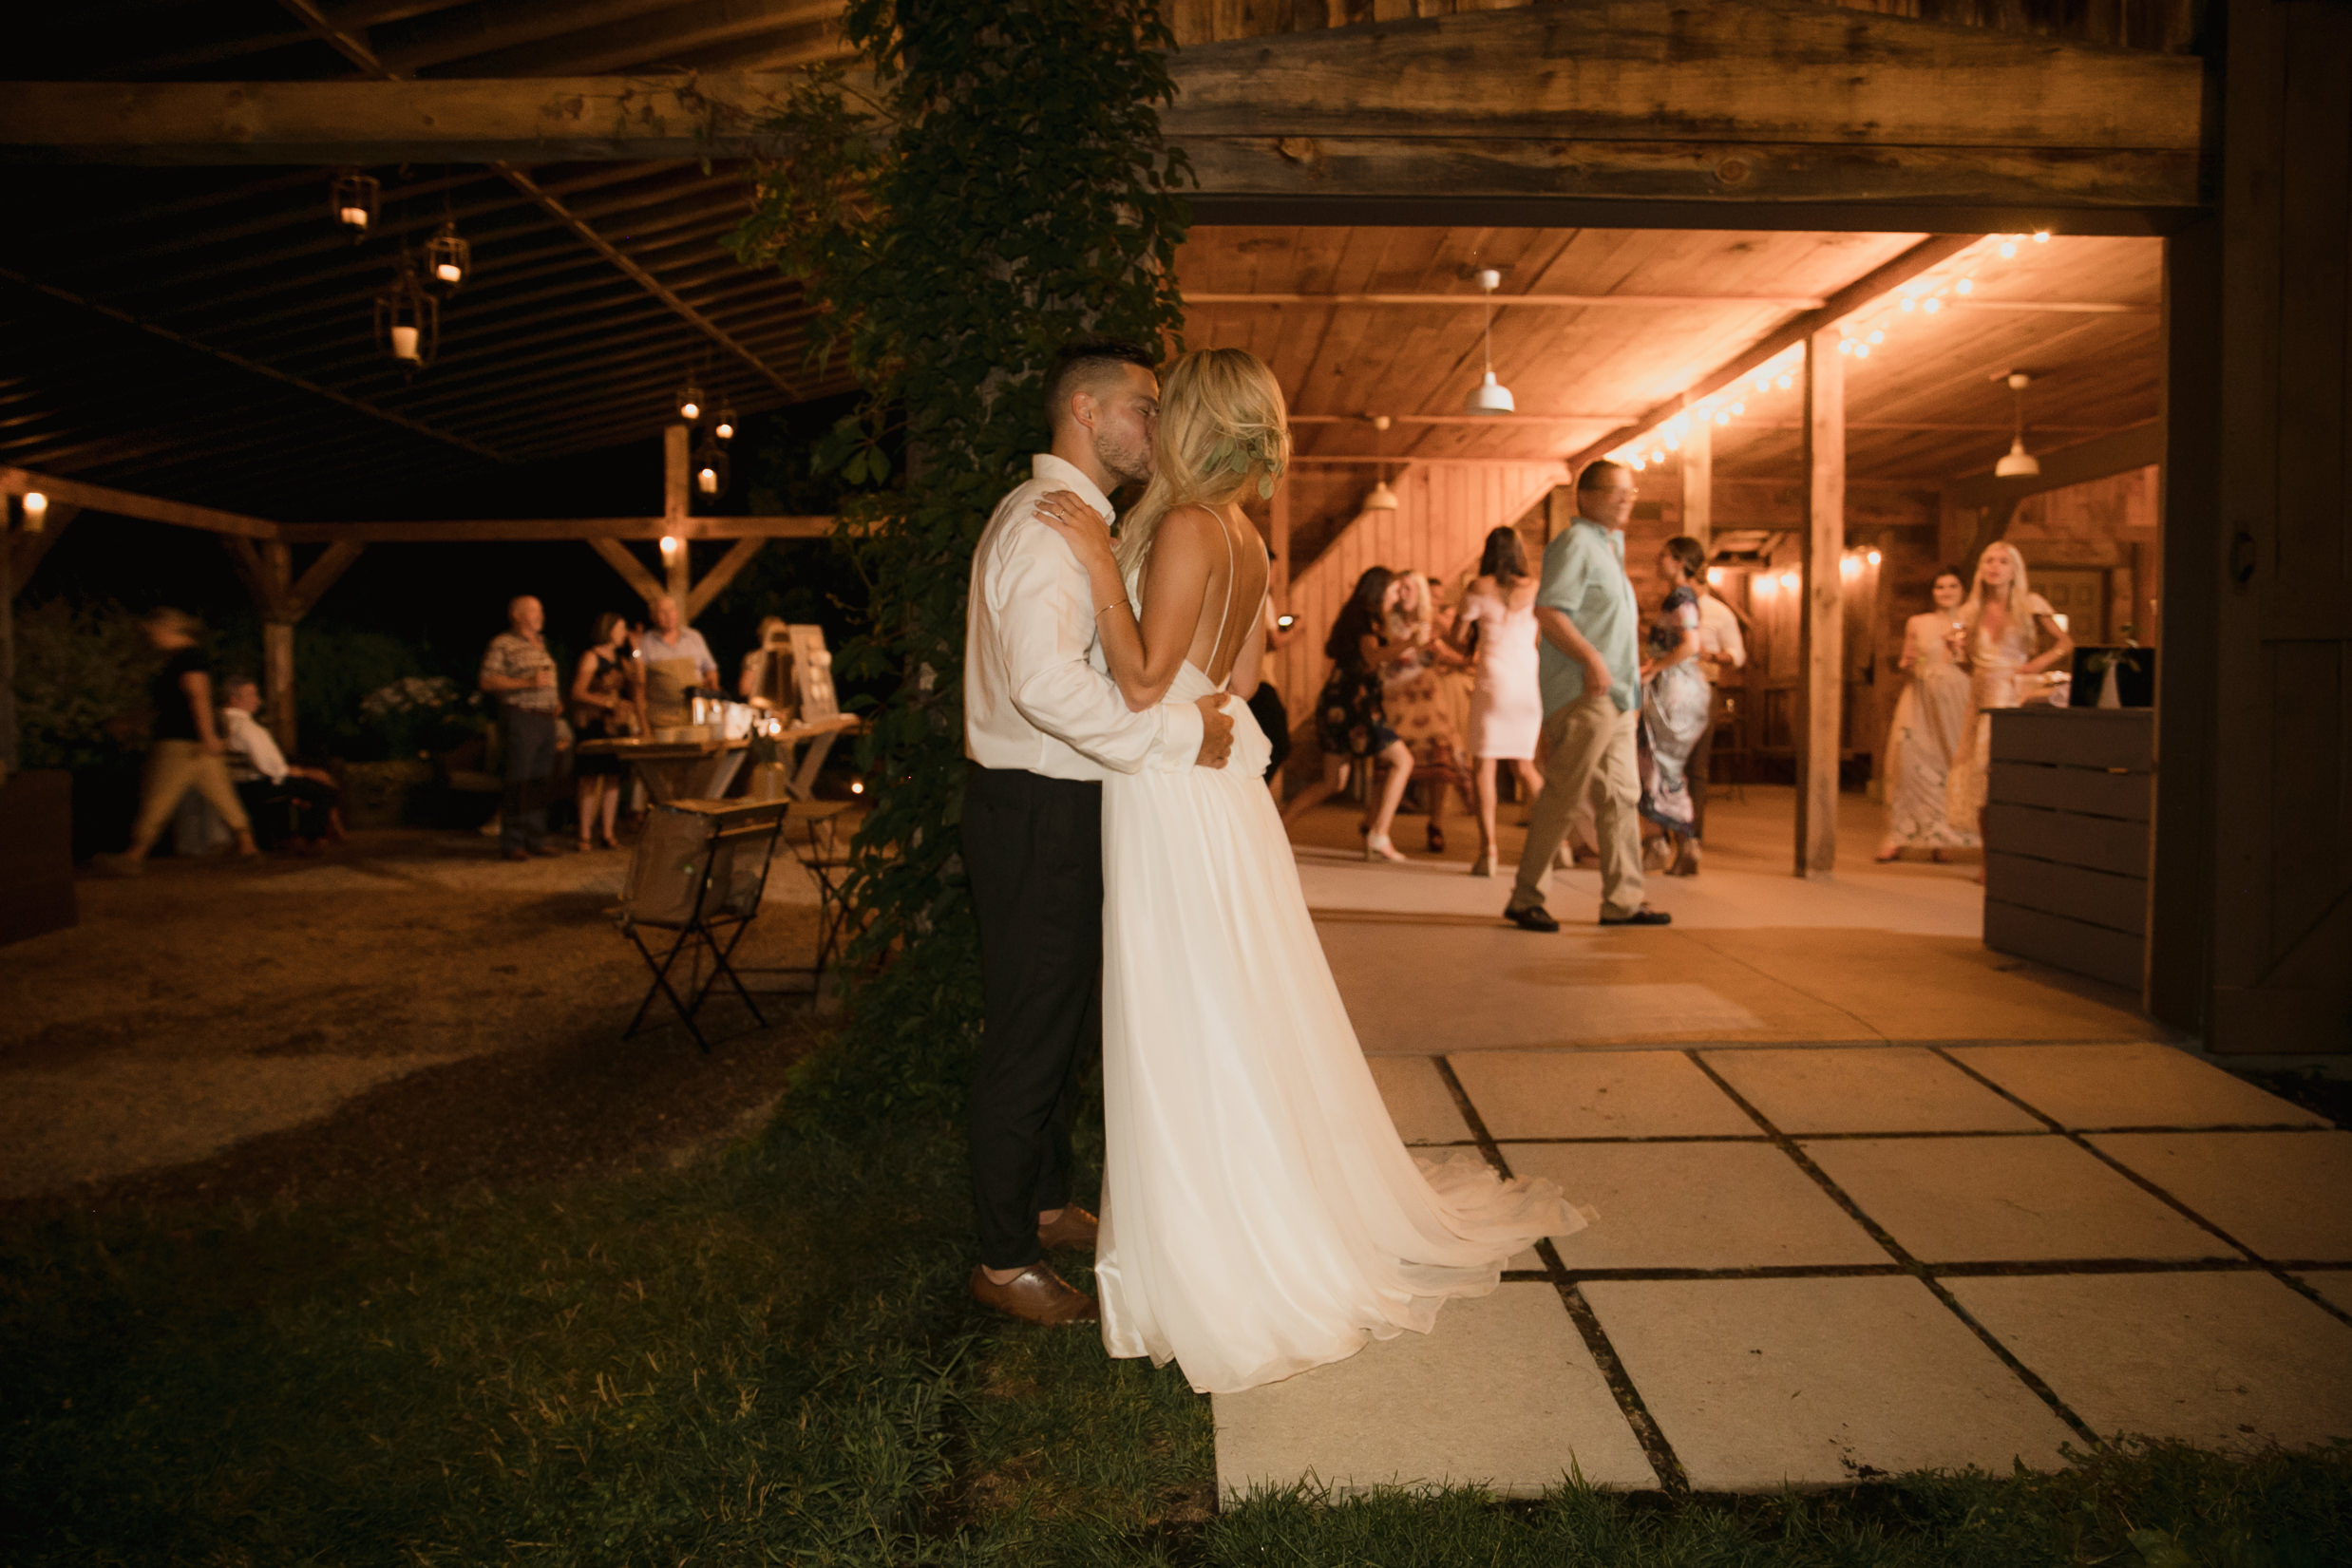 Wedding photo bride and groom reception candid kiss outside dance floor